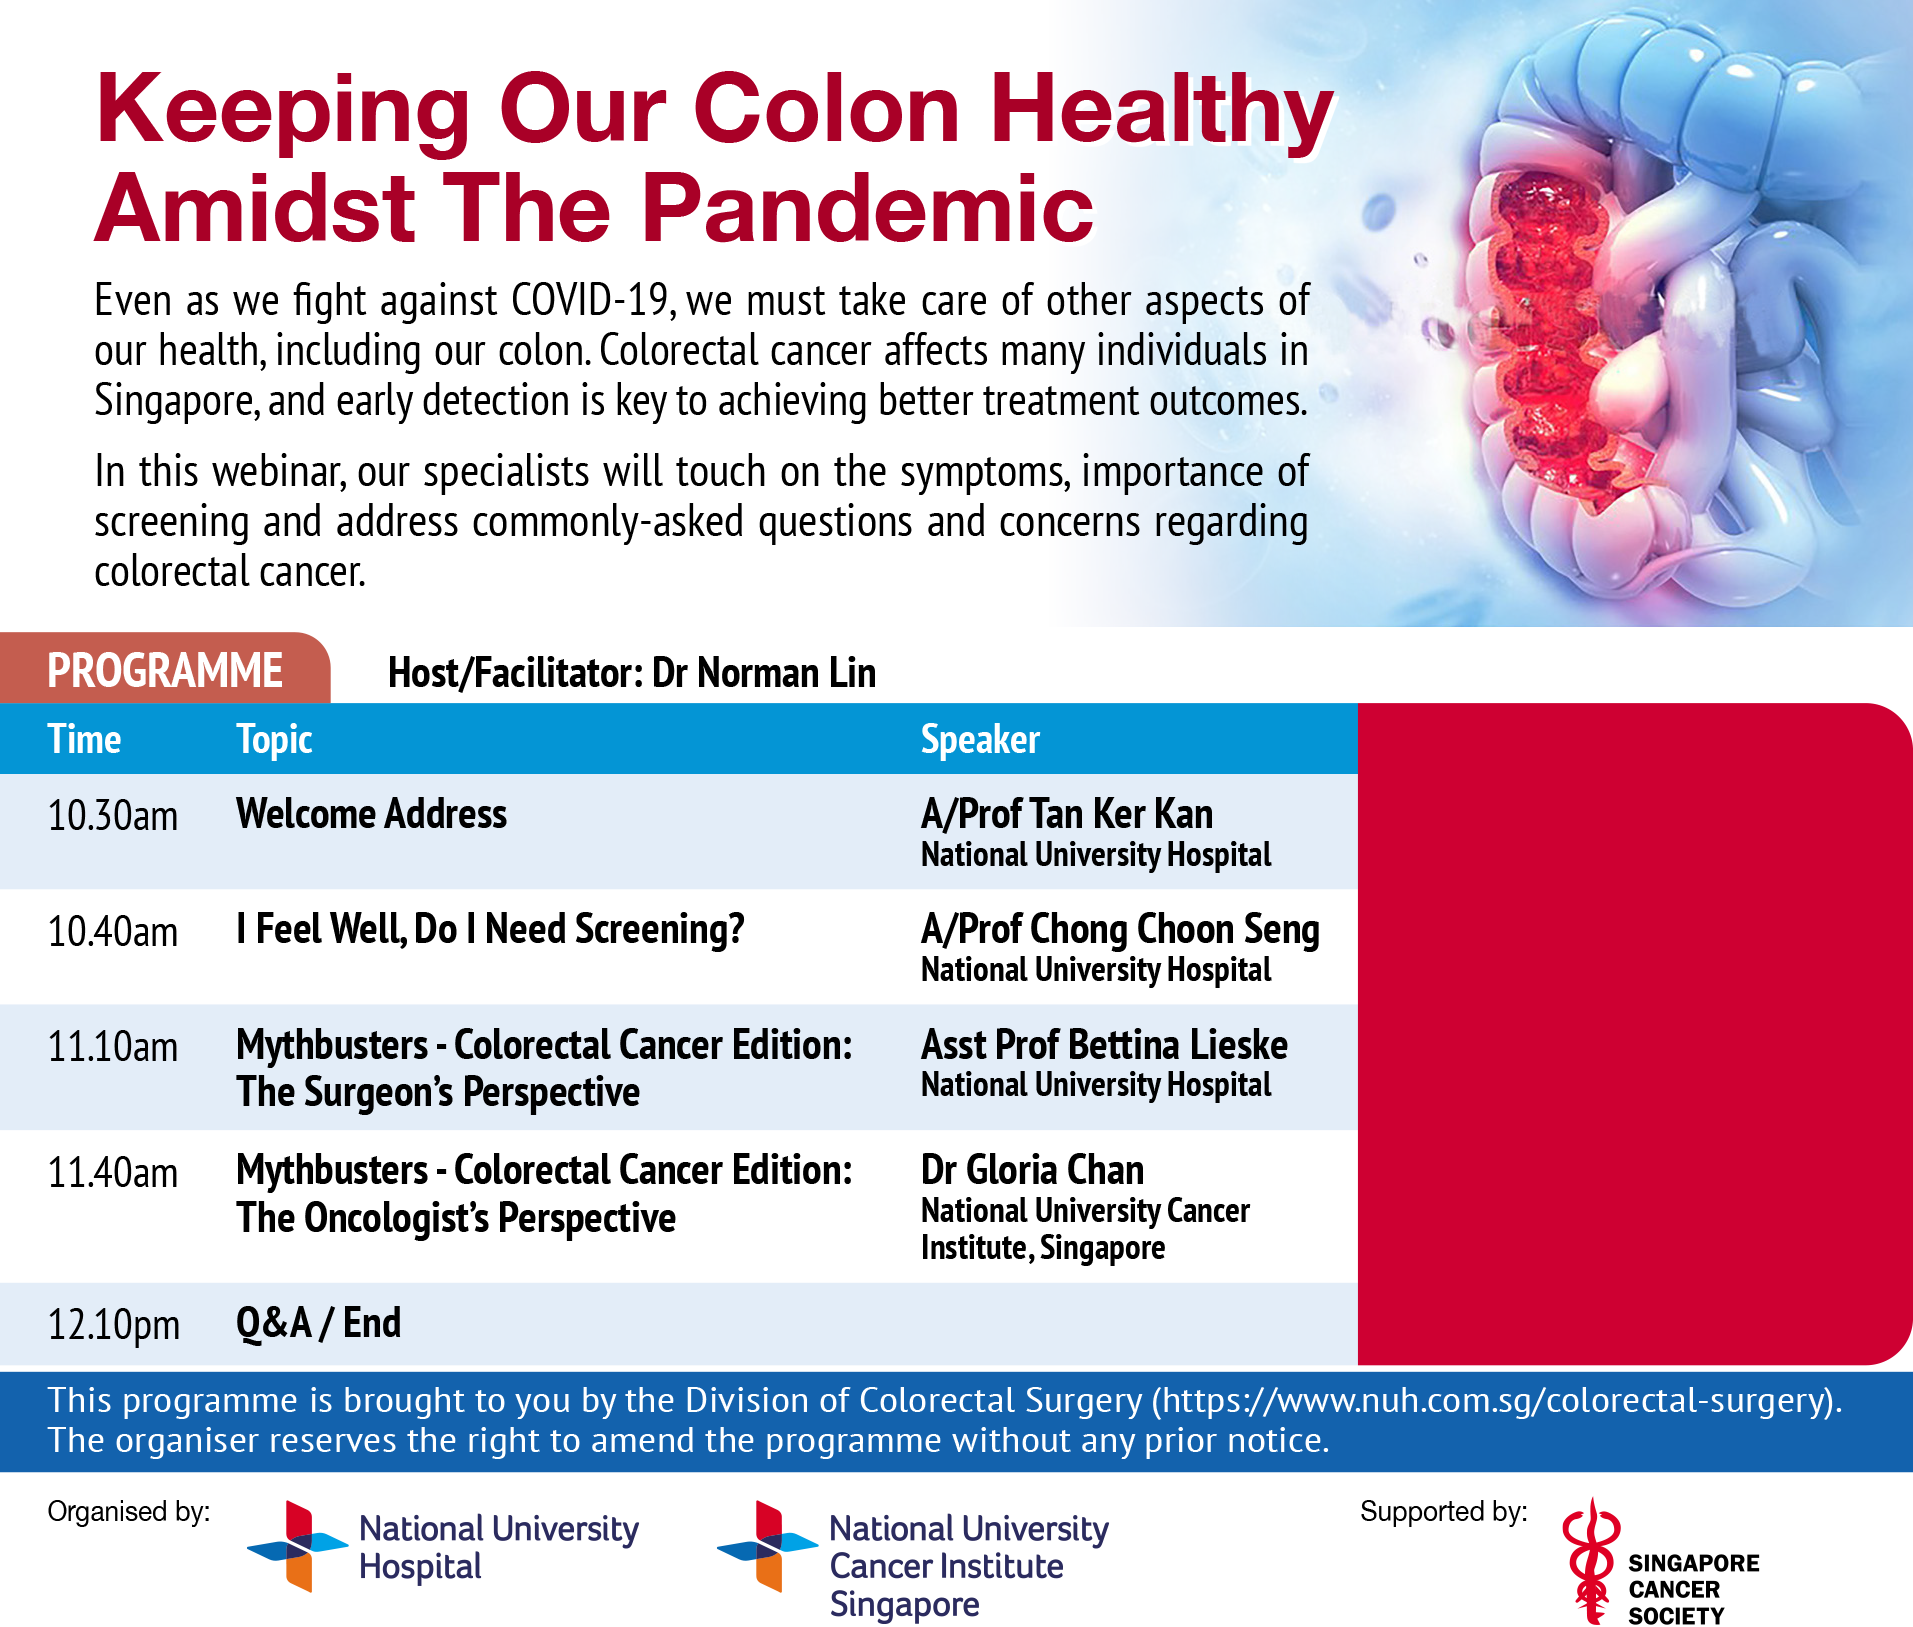 Keeping our Colon Healthy